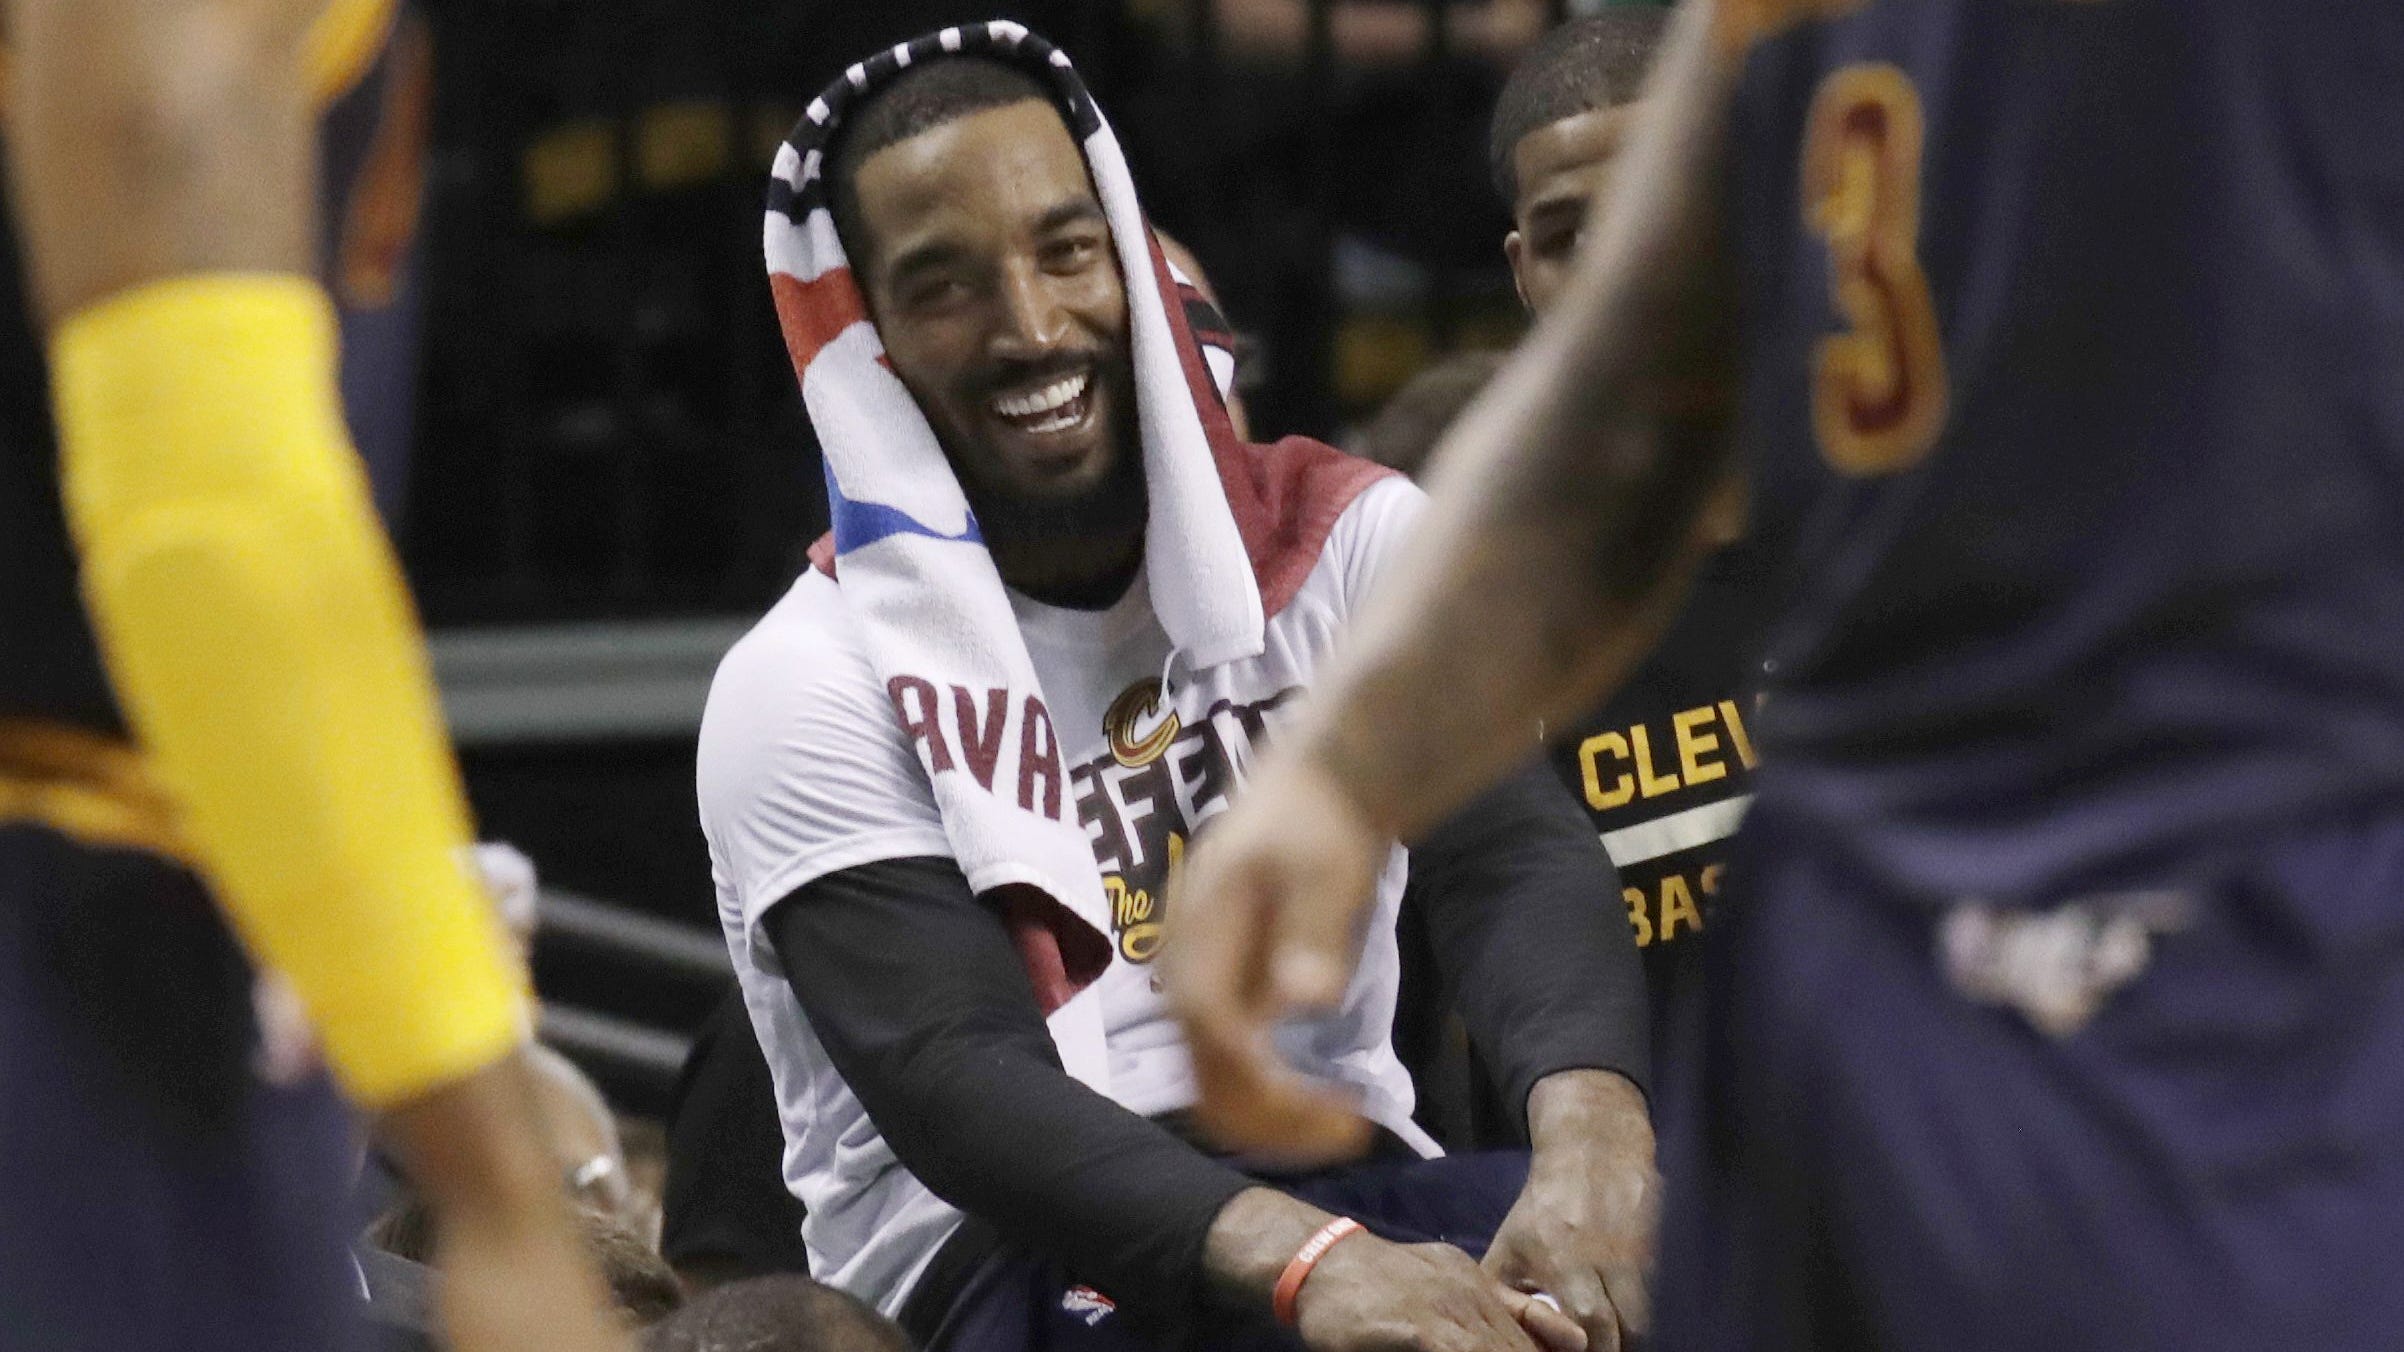 J.R. Smith rocked Supreme-branded sleeve during Cavs game